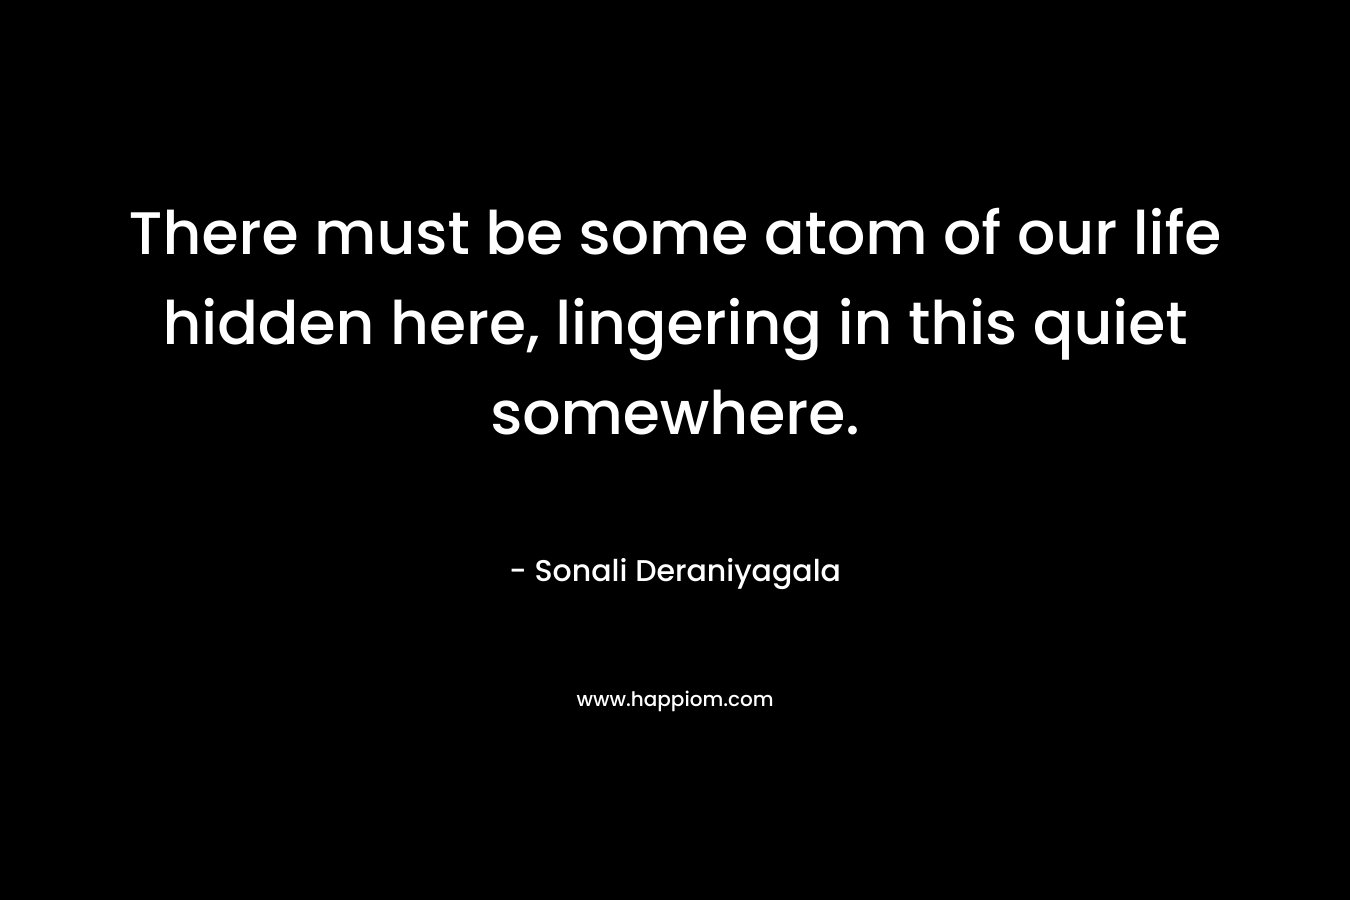 There must be some atom of our life hidden here, lingering in this quiet somewhere. – Sonali Deraniyagala